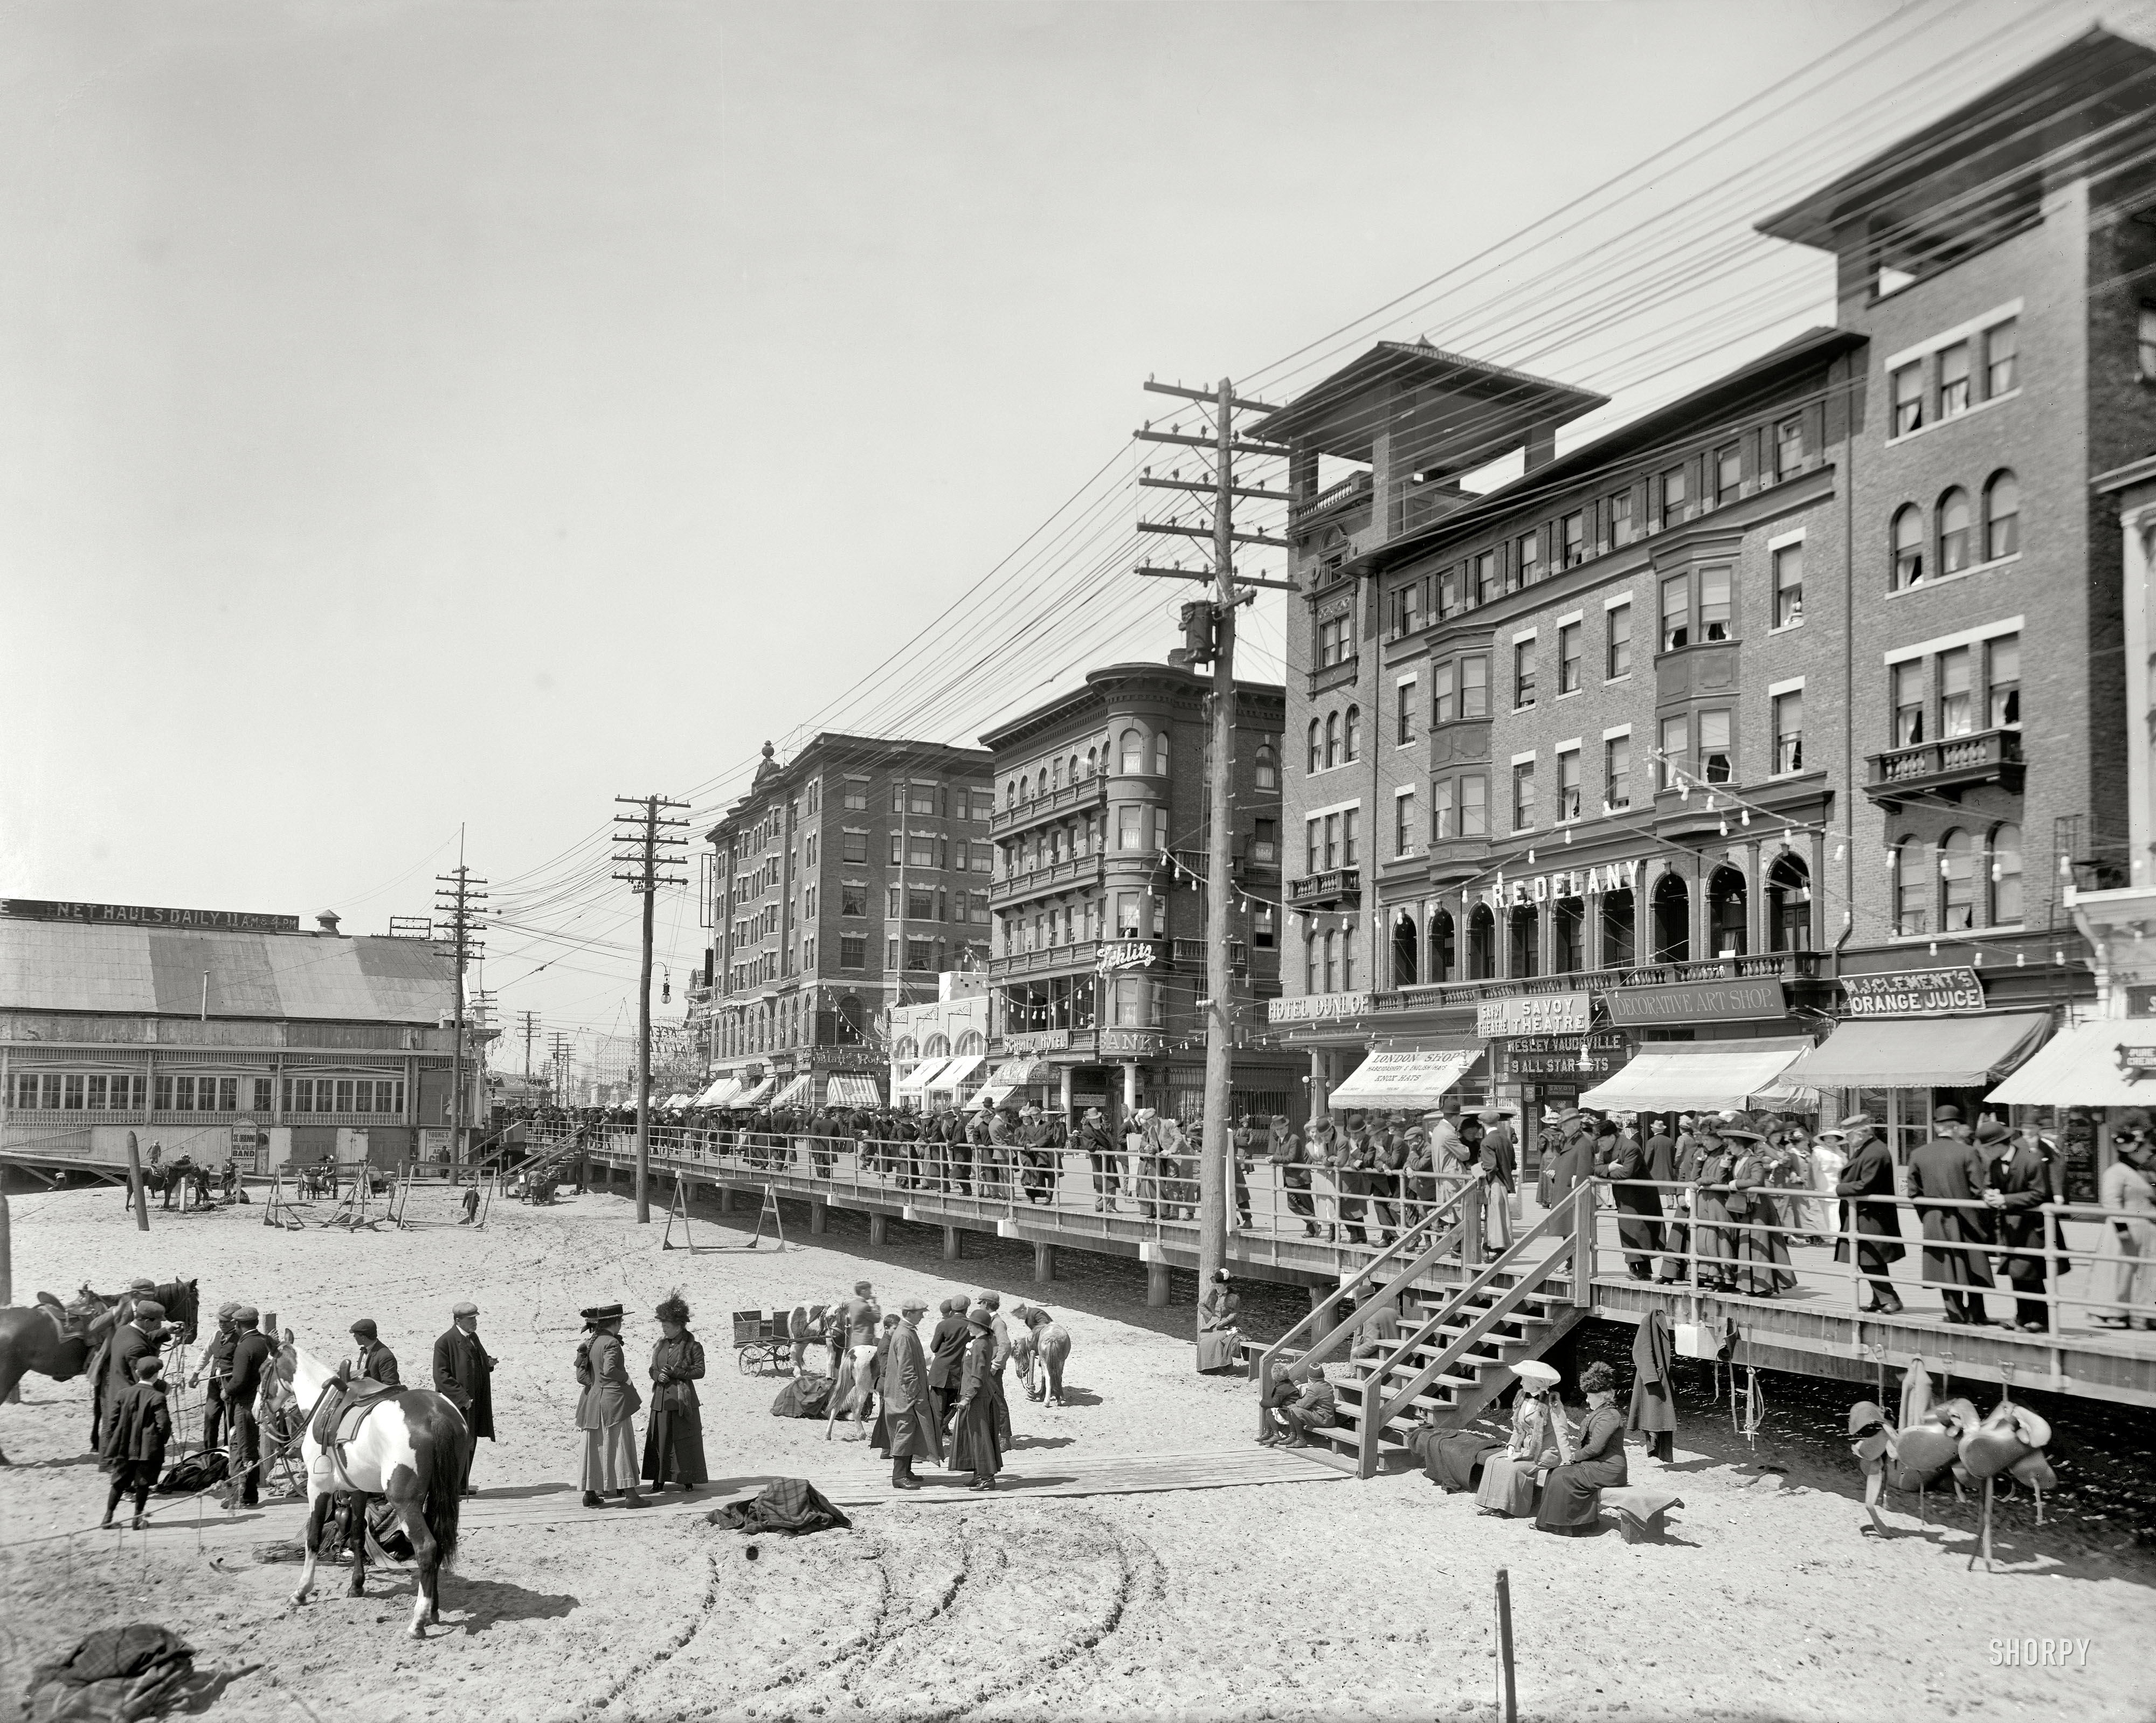 Atlantic City, New Jersey, circa 1911. "Savoy Theatre, Schlitz & Young's hotels." 8x10 inch dry plate glass negative, Detroit Publishing Company. View full size.